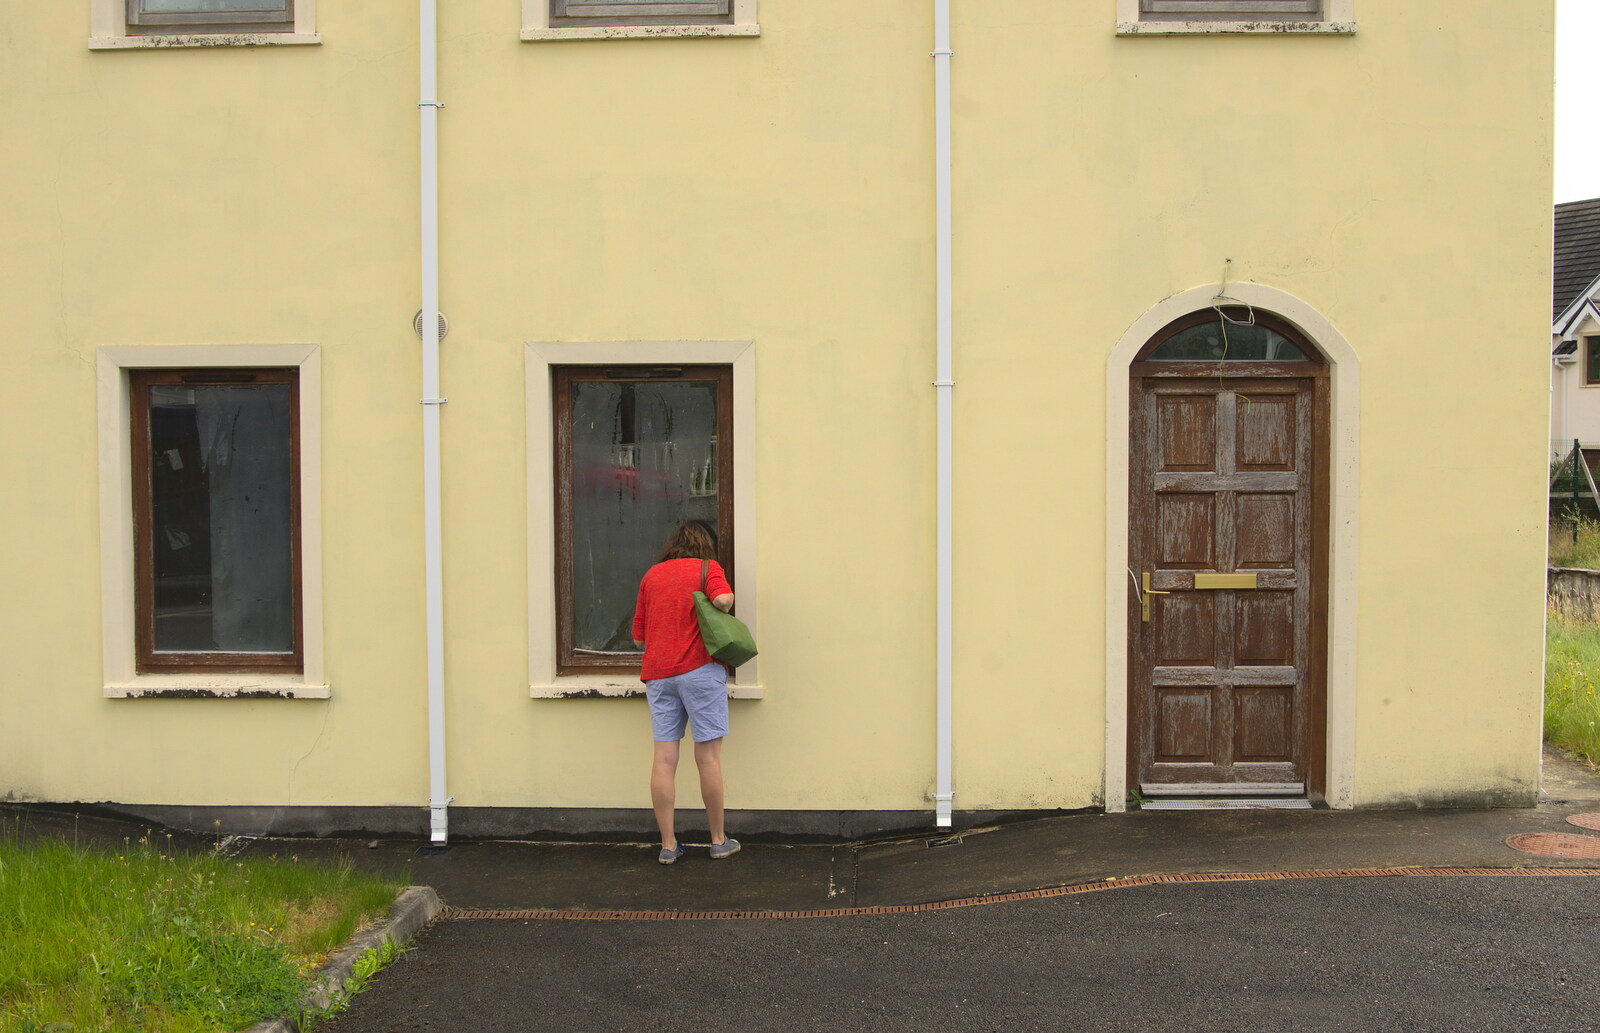 Isobel scopes out one of the derelict houses from In The Sneem, An tSnaidhm, Kerry, Ireland - 1st August 2017